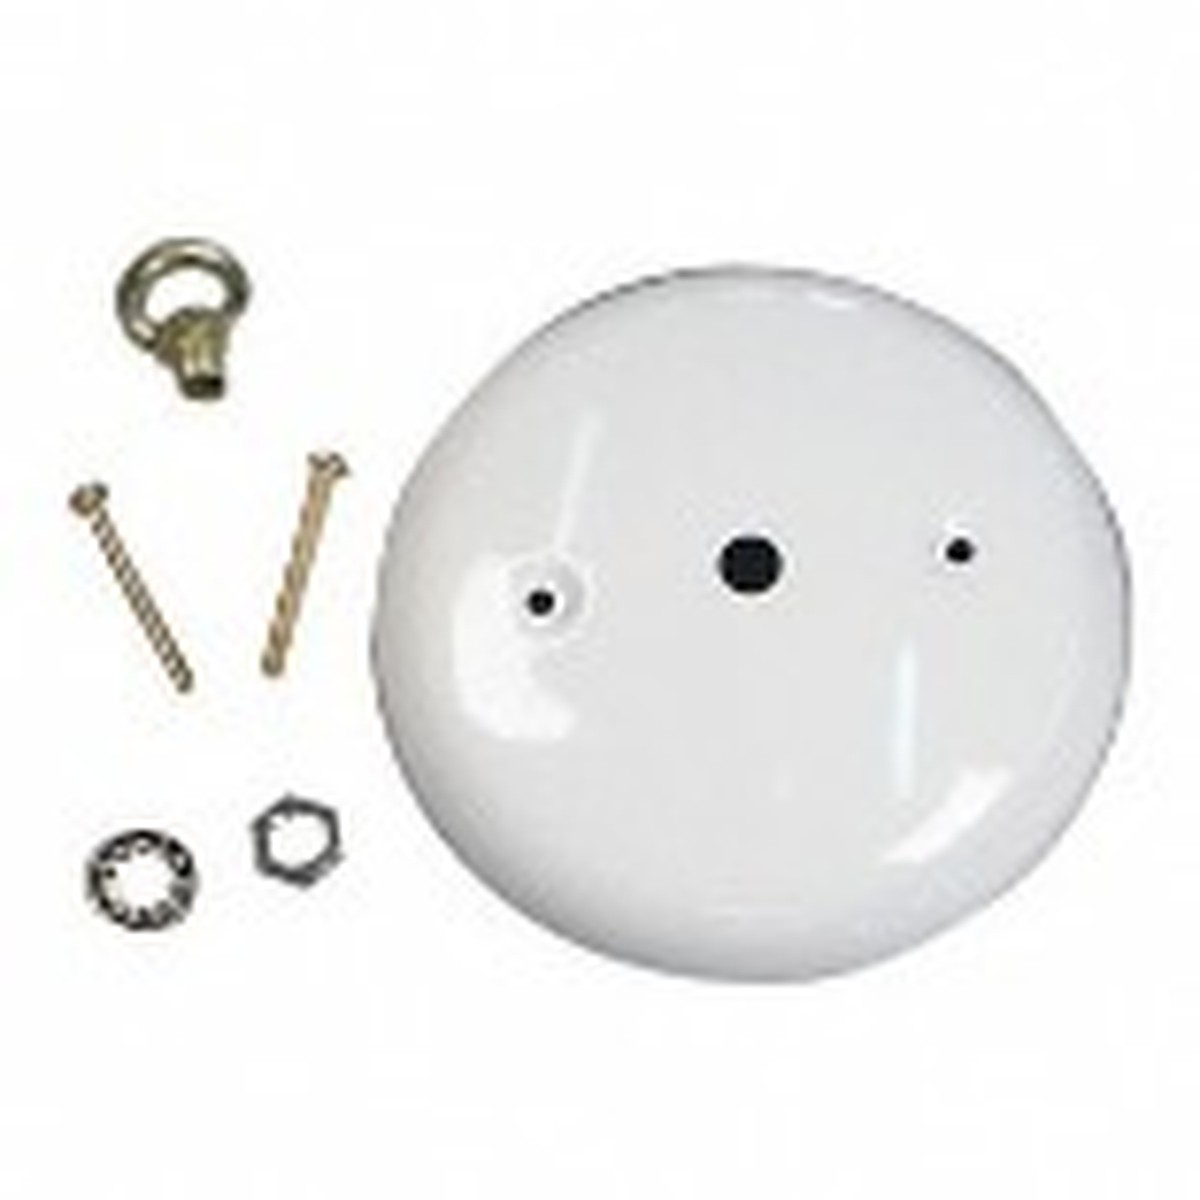 Modern Canopy Kit with Center Hole White Finish